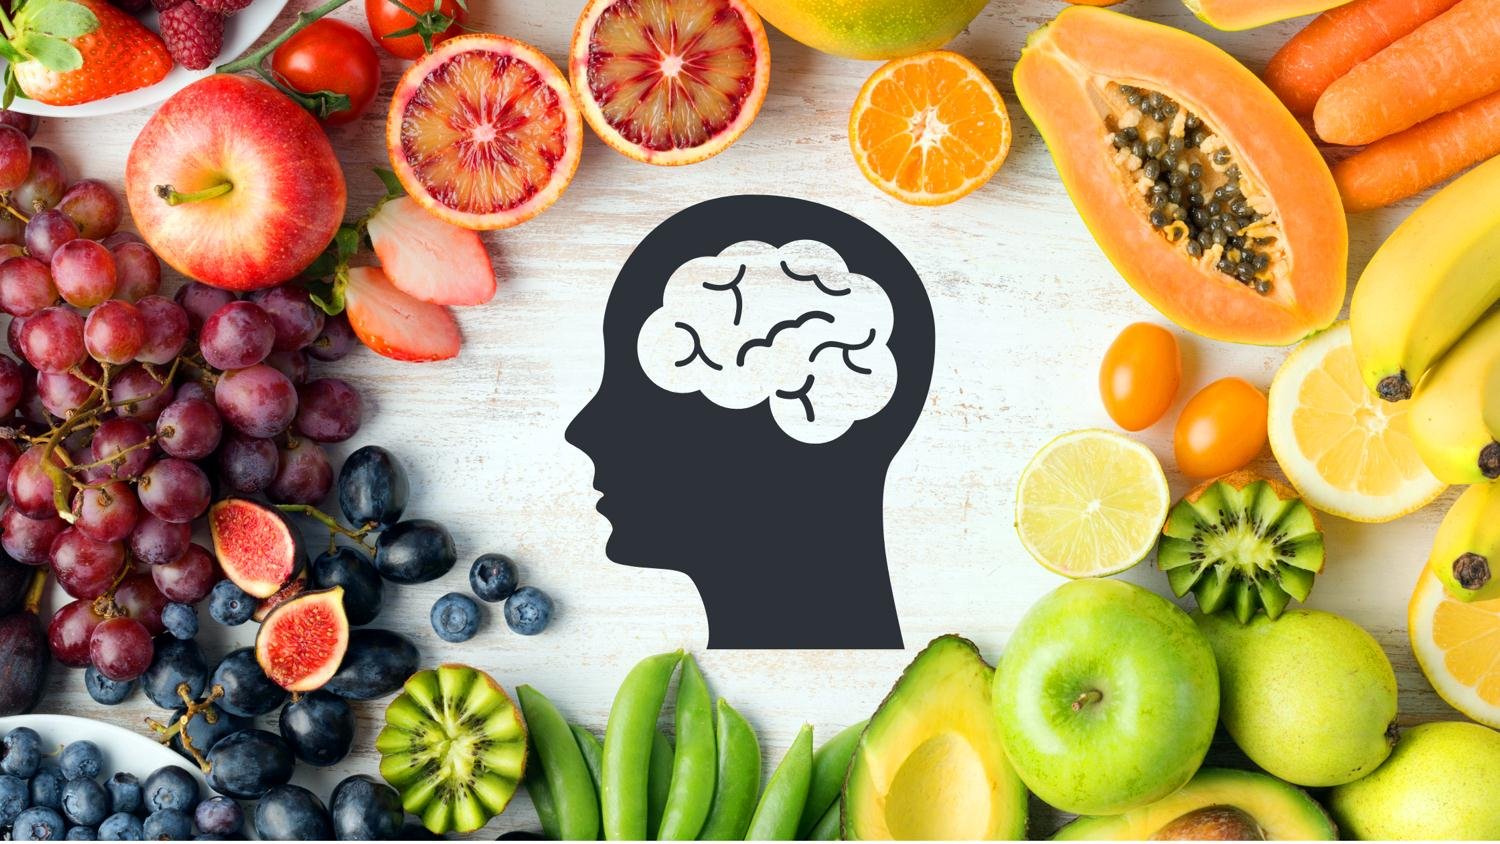 The Impact of Nutrition on Brain Function: Foods for Cognitive Enhancement